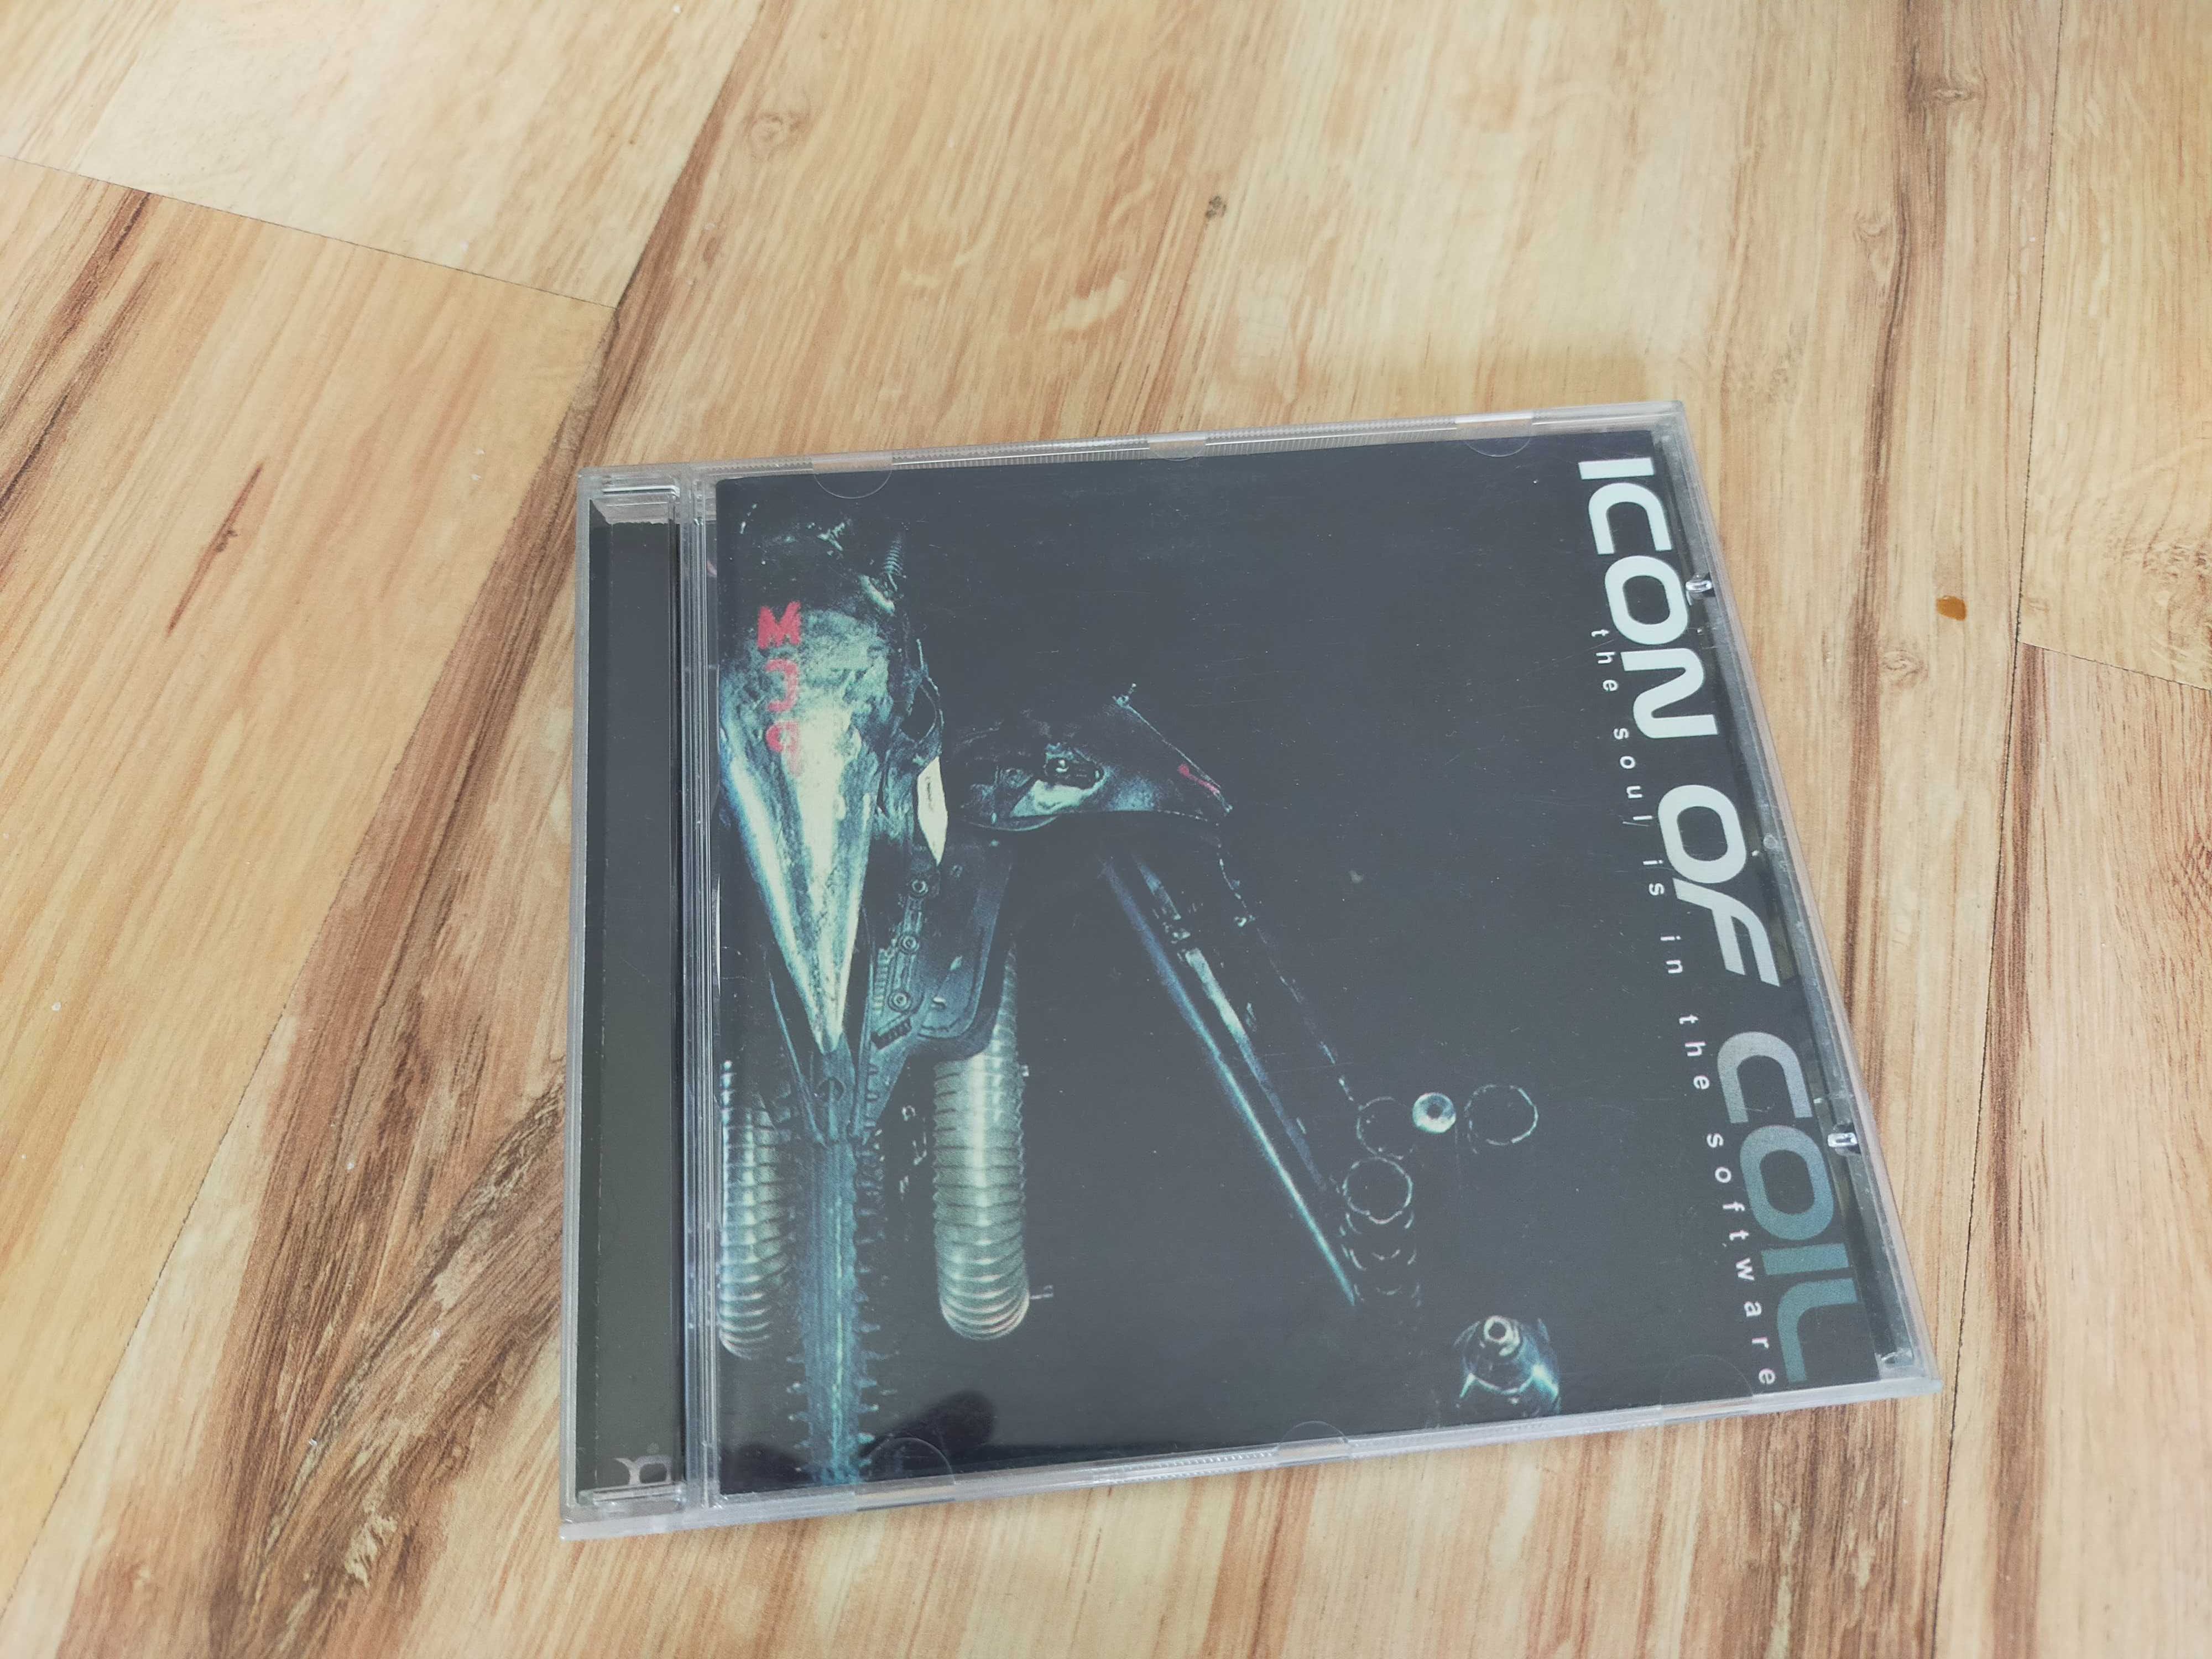 ICON OF COIL - "The Soul Is In The Software" CD jak nowa ! Wyd. USA